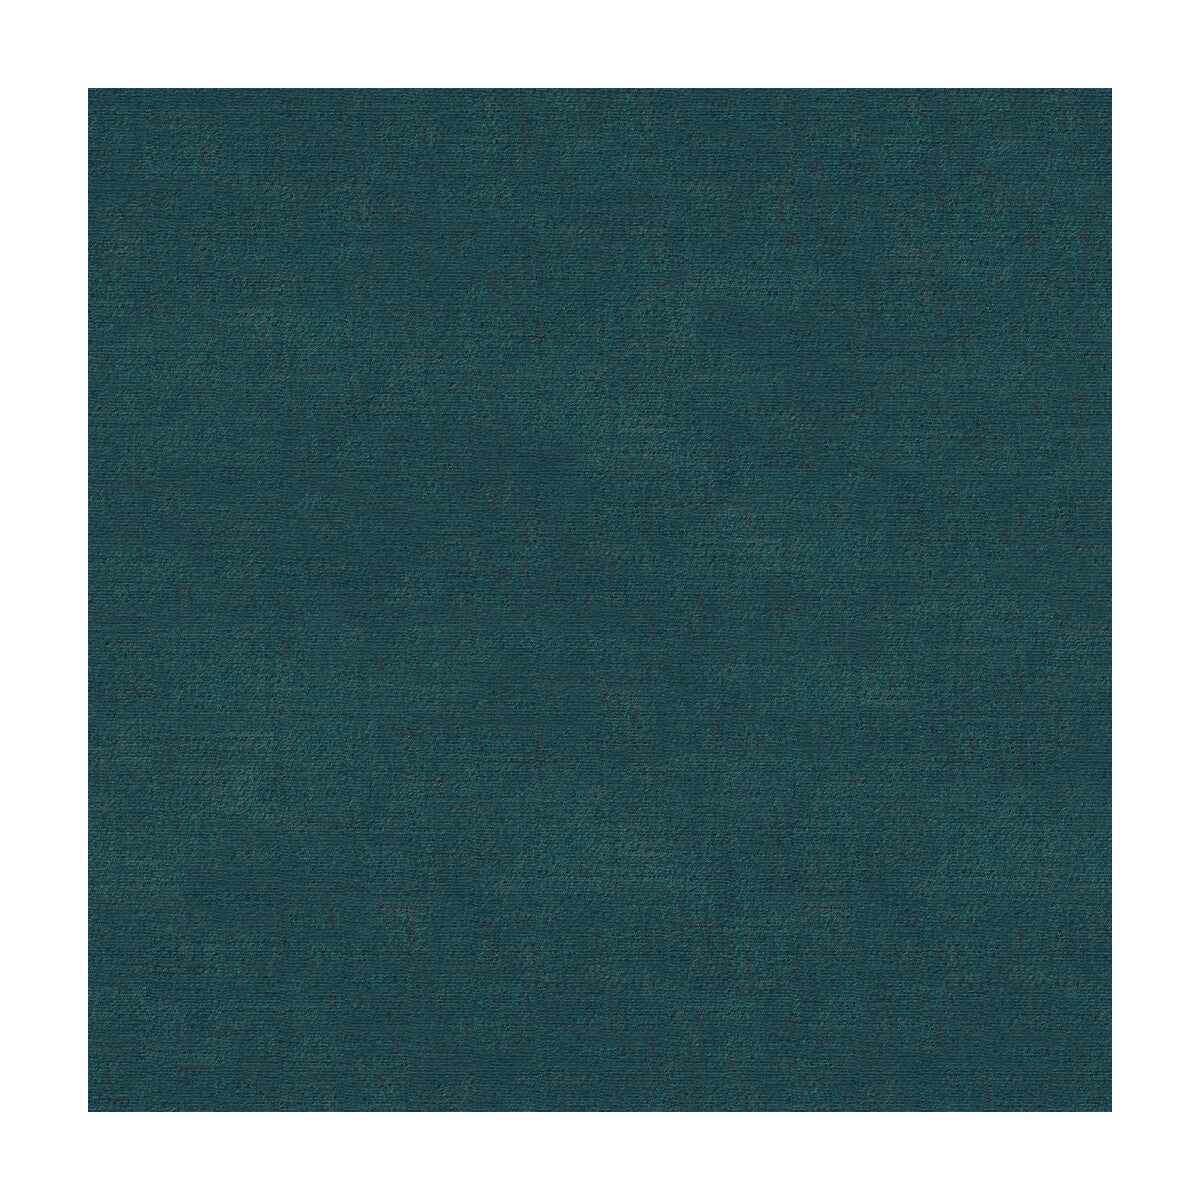 Montage fabric in teal color - pattern GWF-3526.35.0 - by Lee Jofa Modern in the Kelly Wearstler III collection